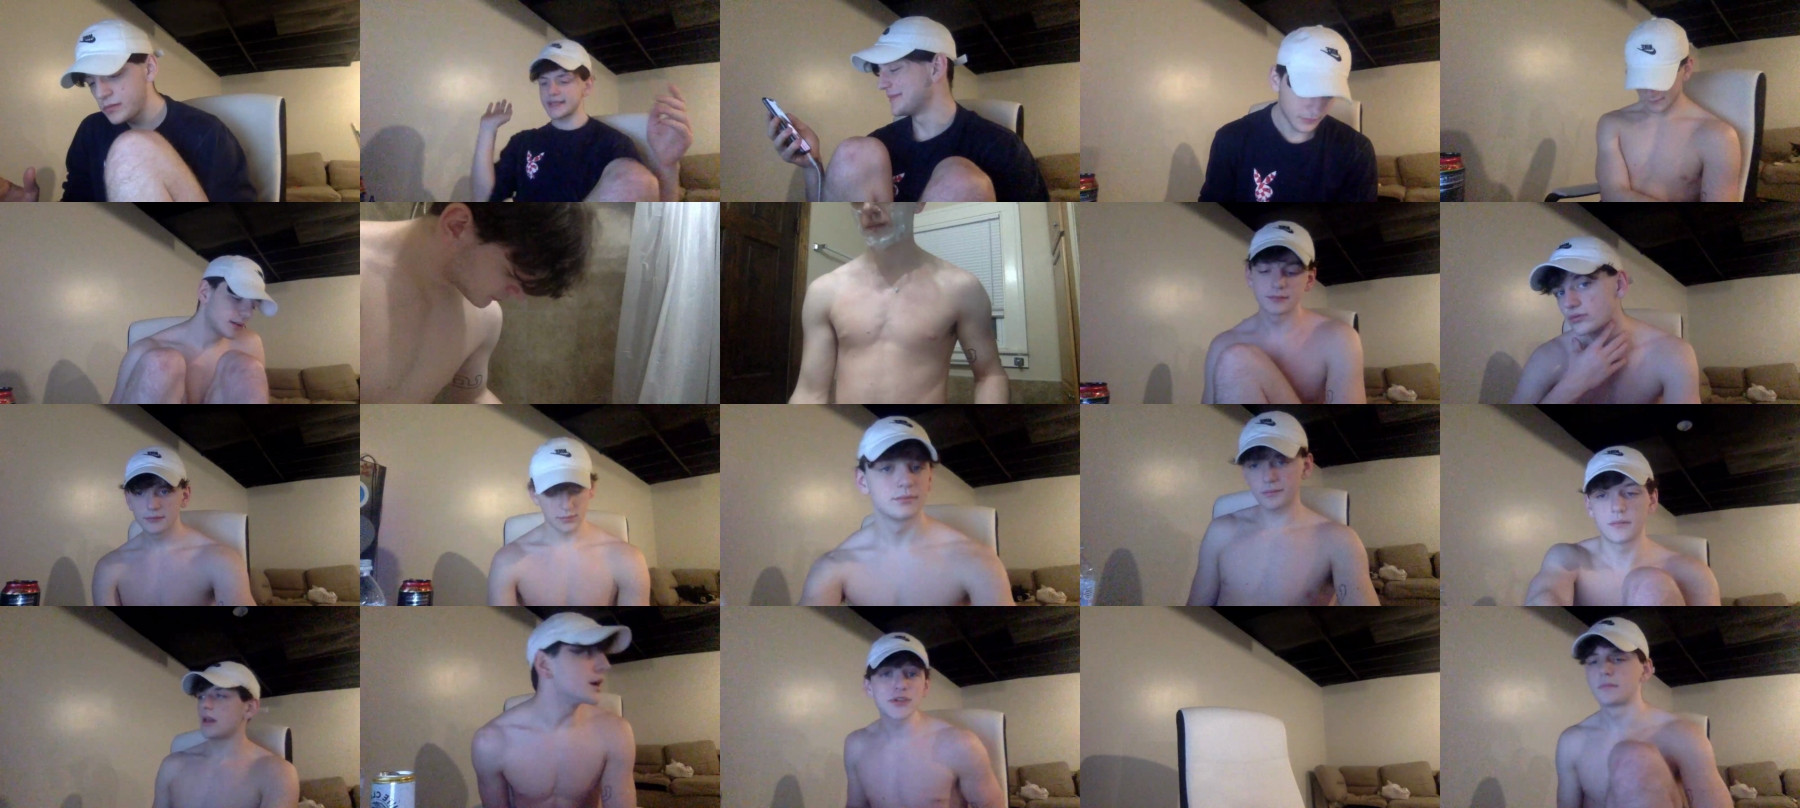 Sexylax69  29-04-2021 Male Download